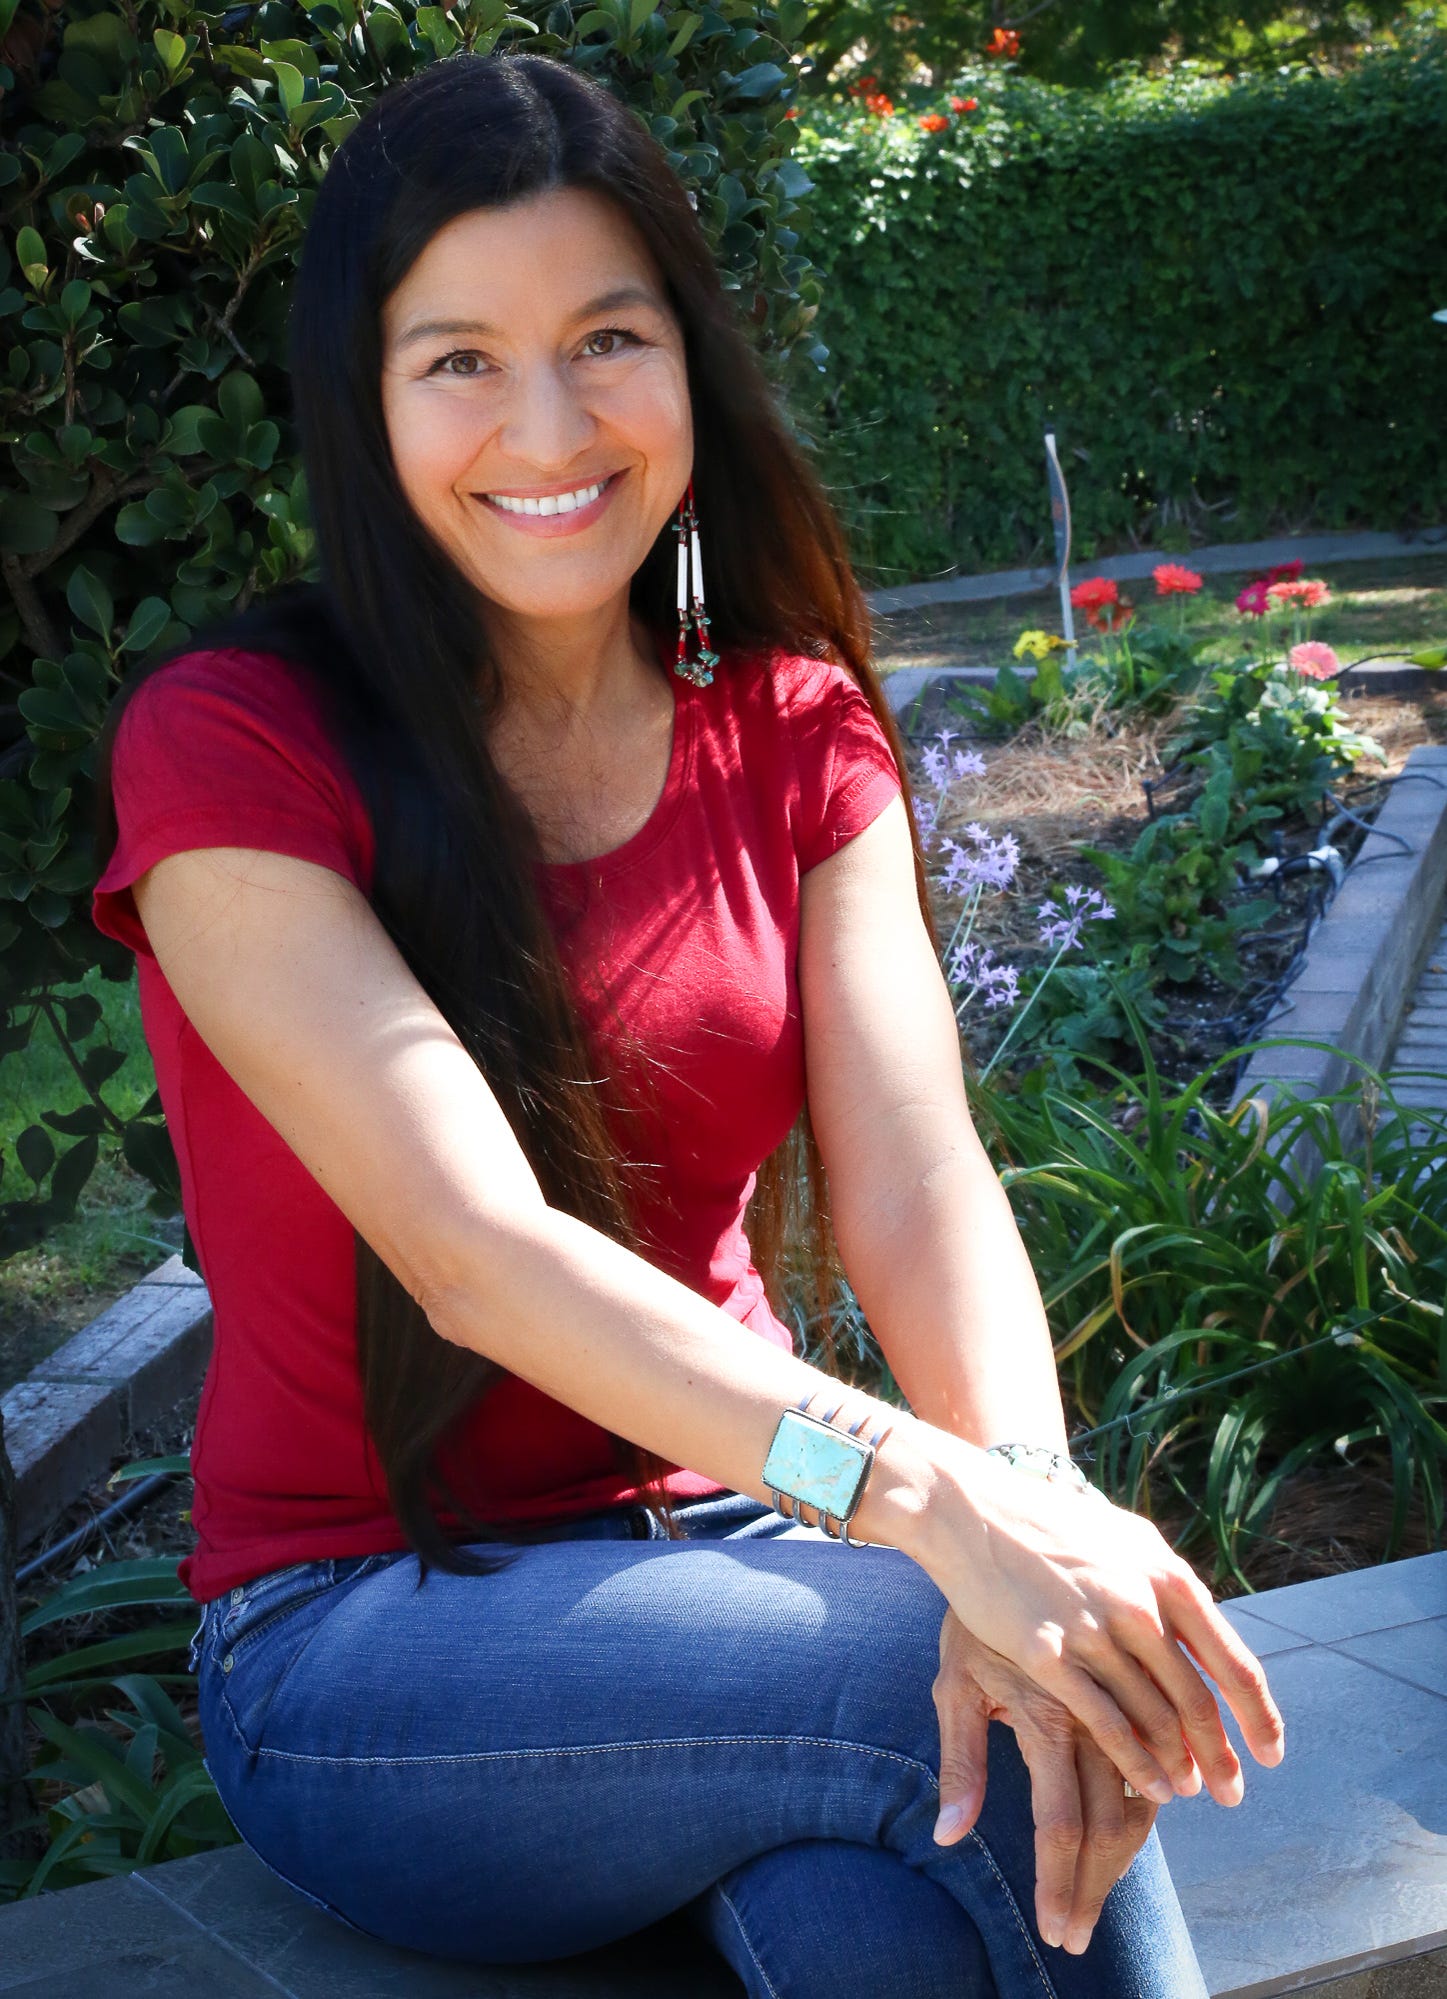 Kimberly Norris Guerrero The Native American Actress You Need To Know.